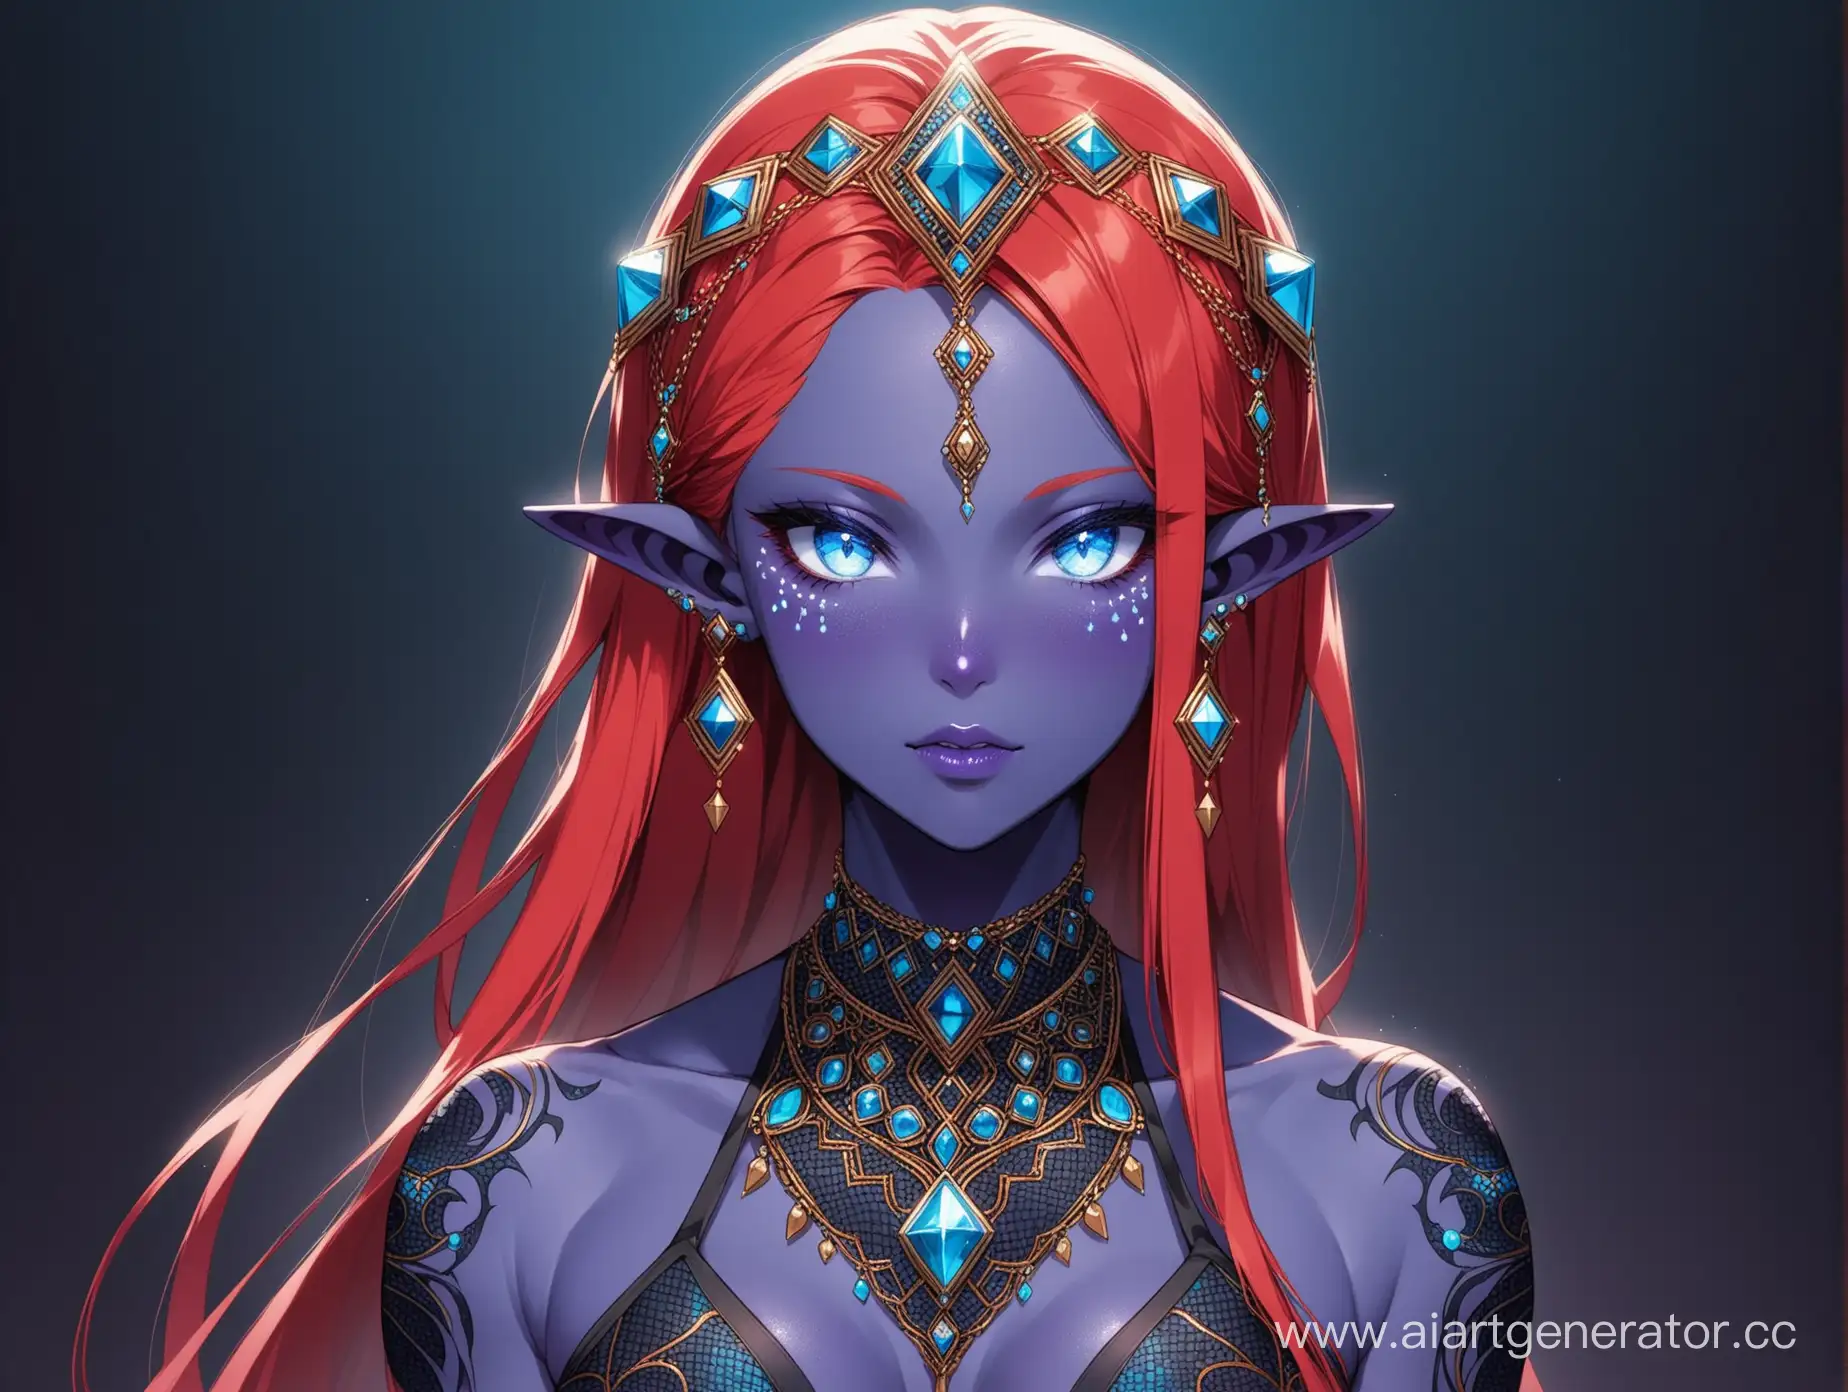 Fantasy-Purple-Elf-Woman-with-Jewel-Adornments-and-Intricate-Clothing